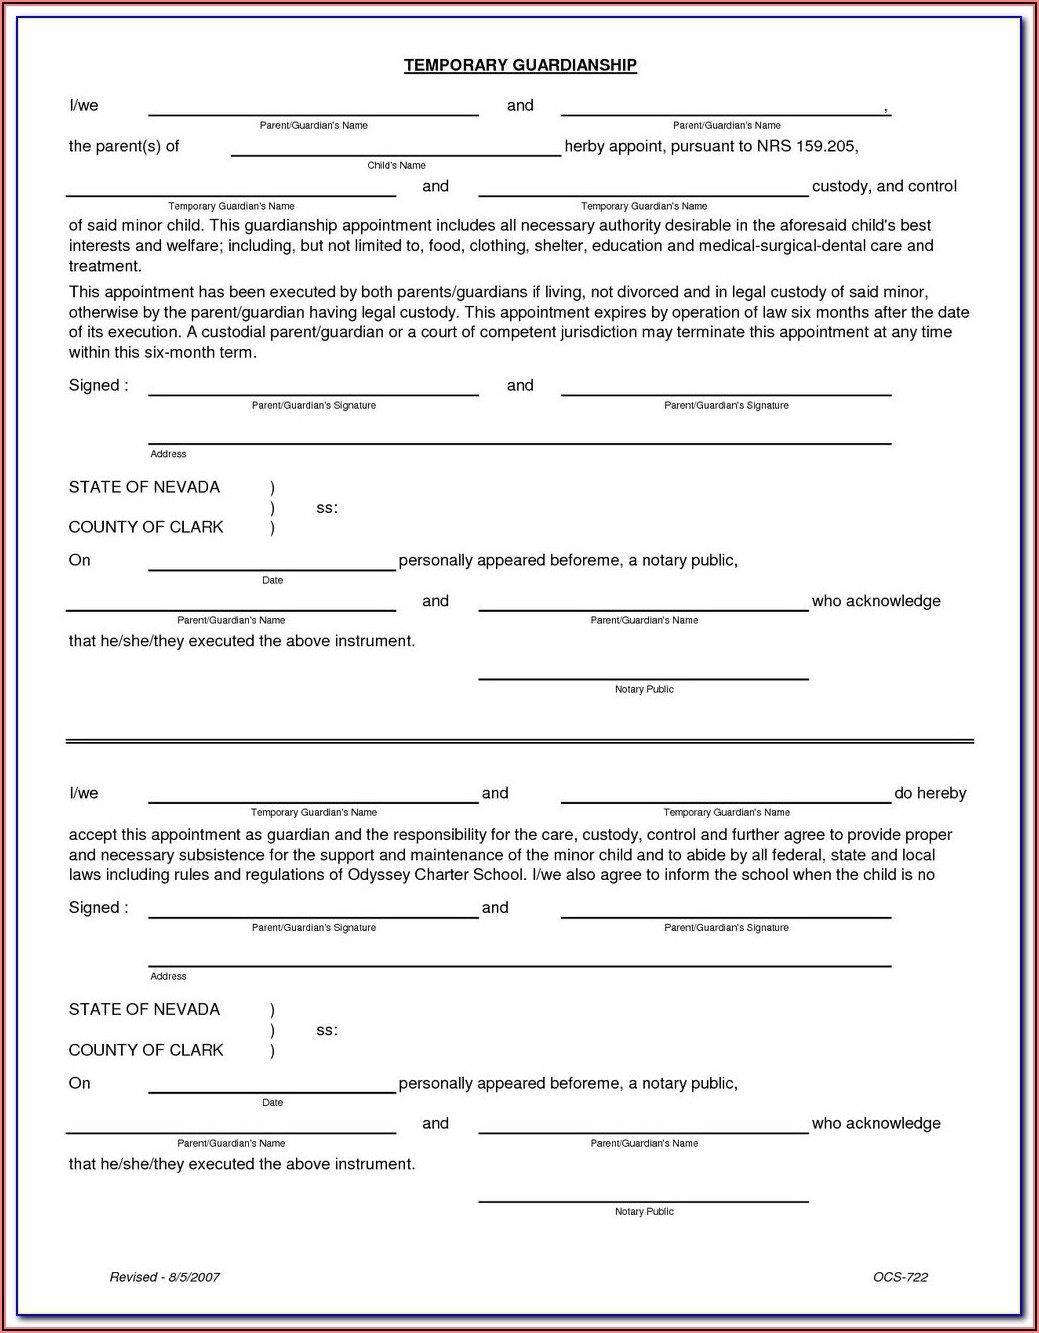 Indiana Form St 103